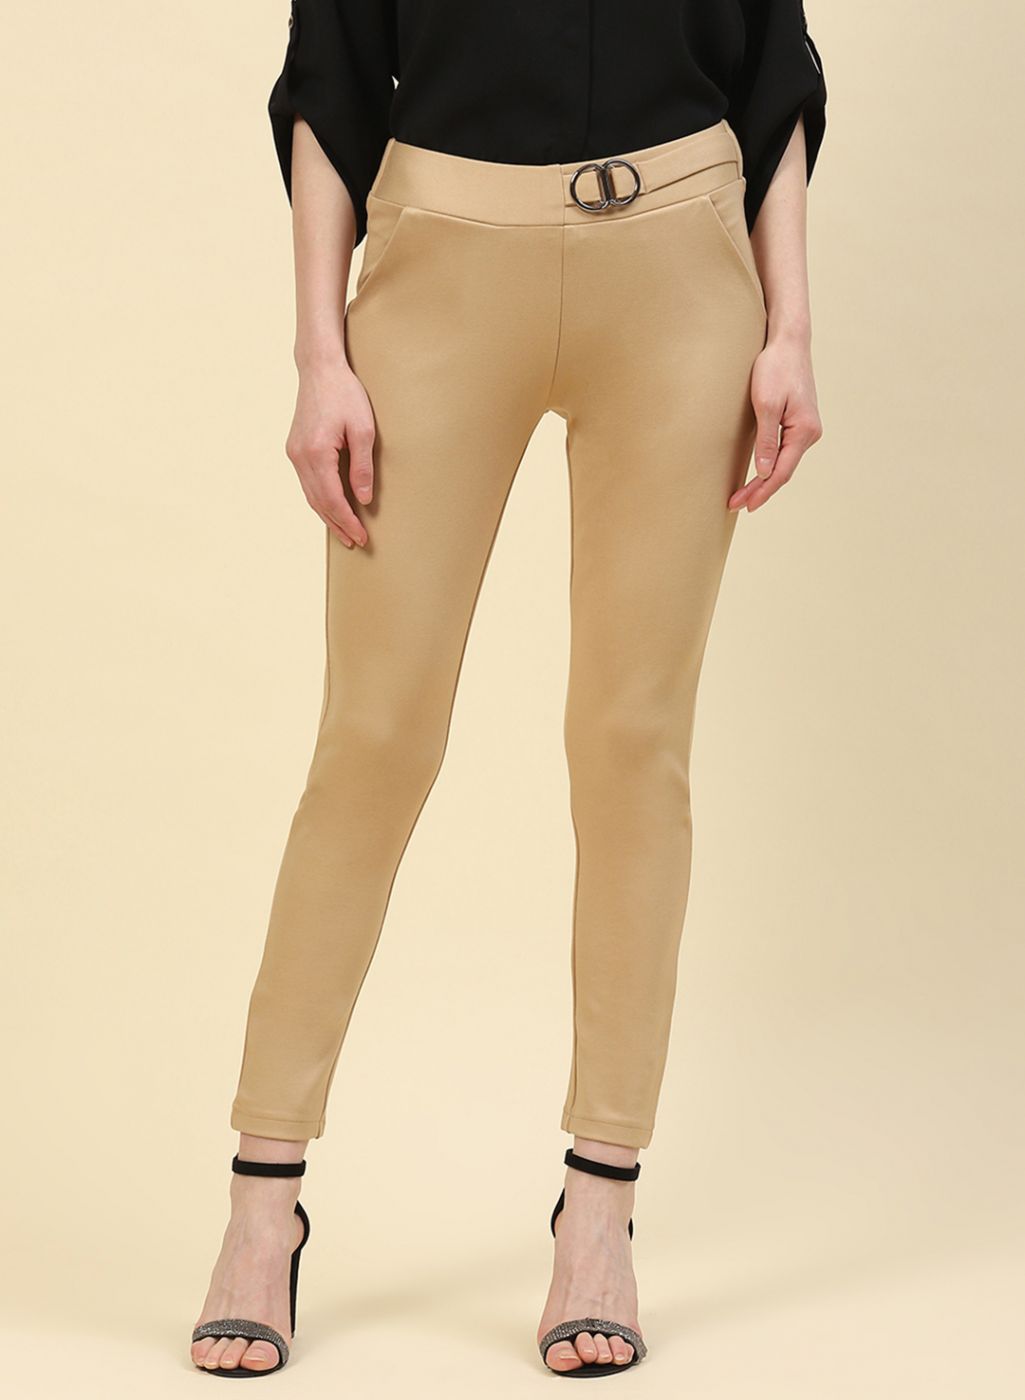 Burberry Ladies Ceramic Brown Cotton Linen Tailored Trousers, Brand Size 4  (US Size 2) 4560436 - Apparel - Jomashop